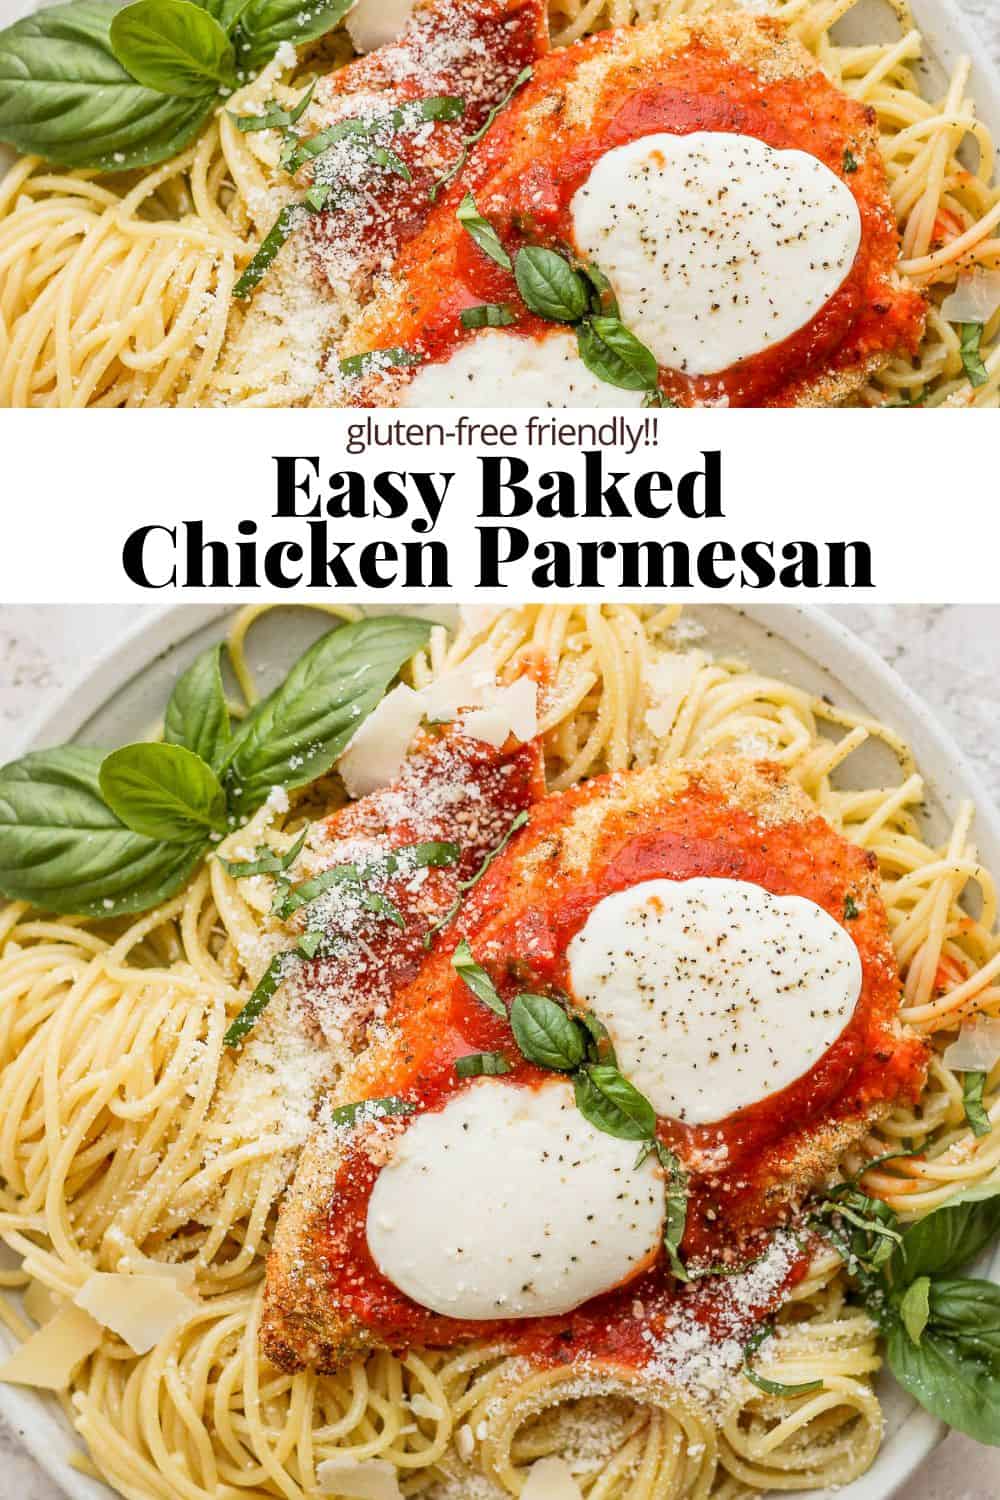 Pinterest image with baked chicken parmesan on the top, the recipe title in the middle, and another shot of baked chicken parmesan on the bottom.